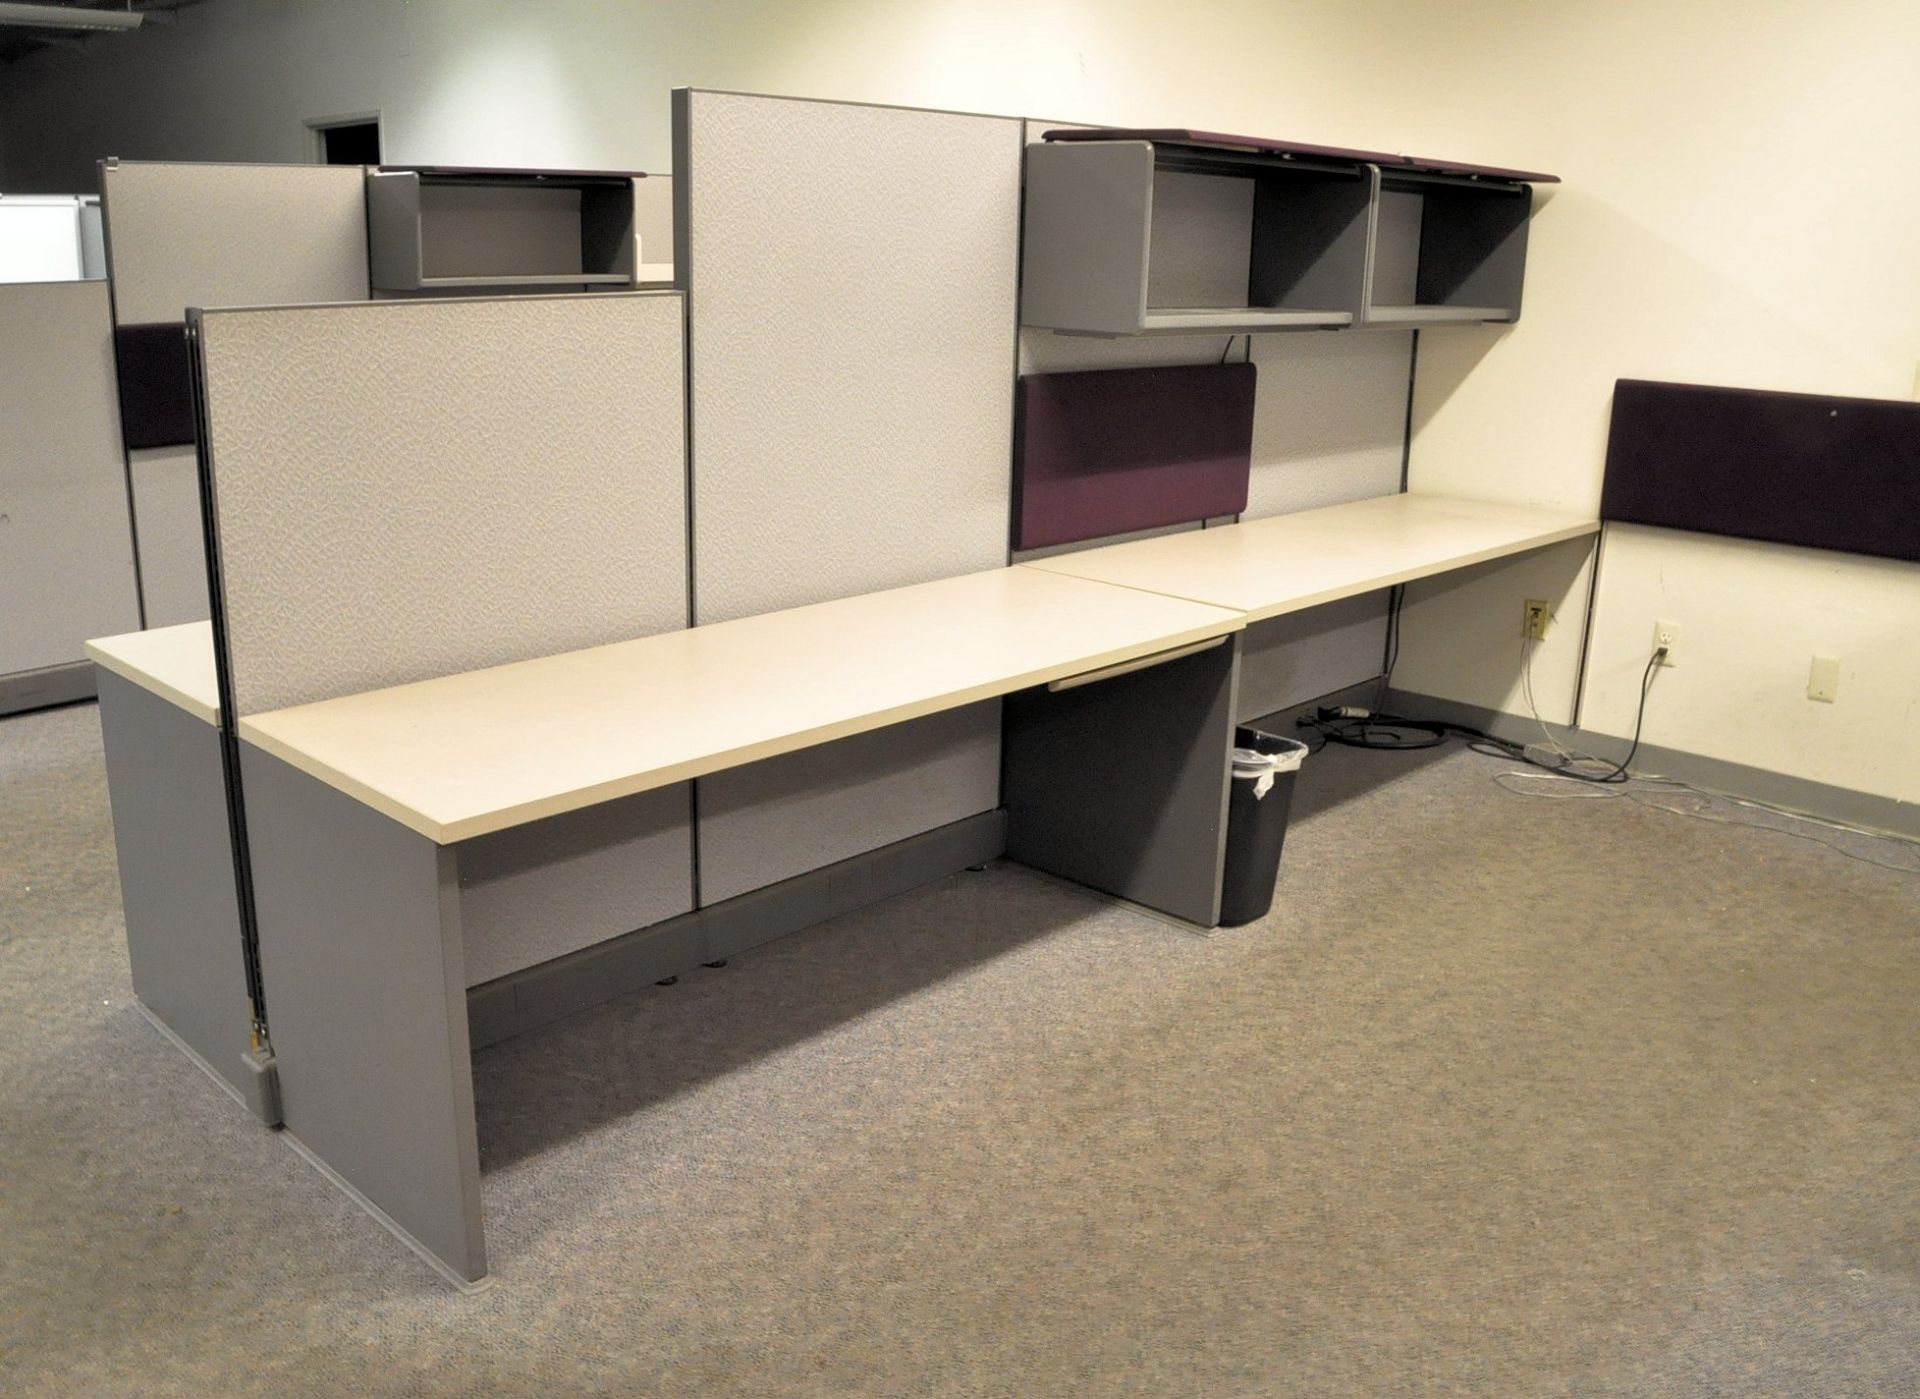 Lot-Cubical Partition Work Systems in (1) Group in (1) Office, - Image 5 of 7